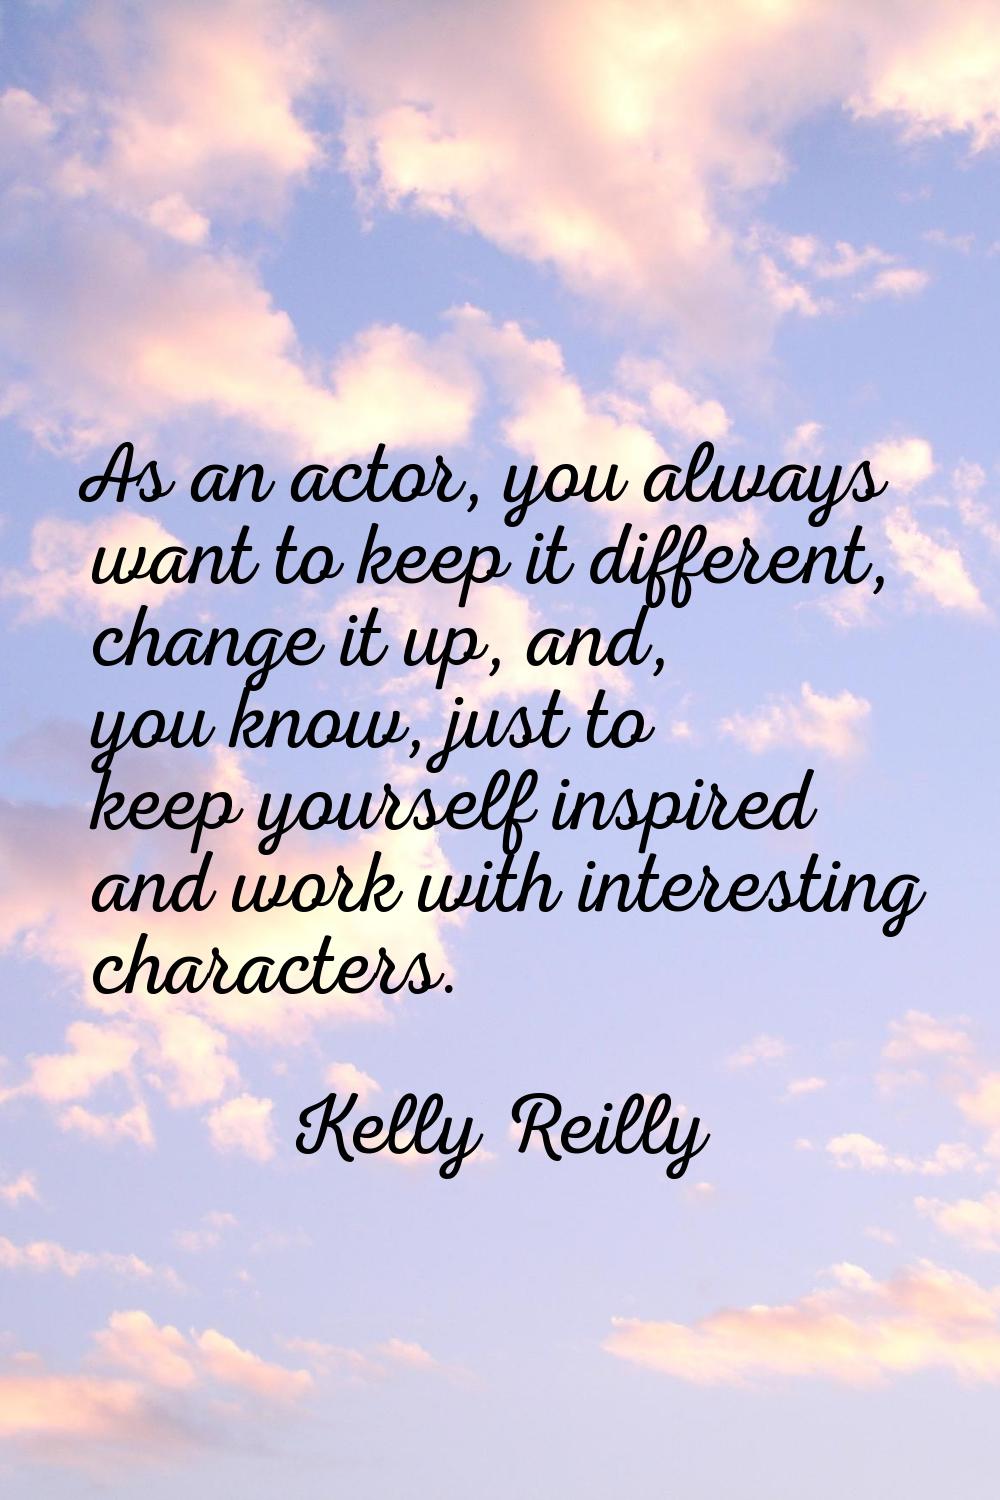 As an actor, you always want to keep it different, change it up, and, you know, just to keep yourse